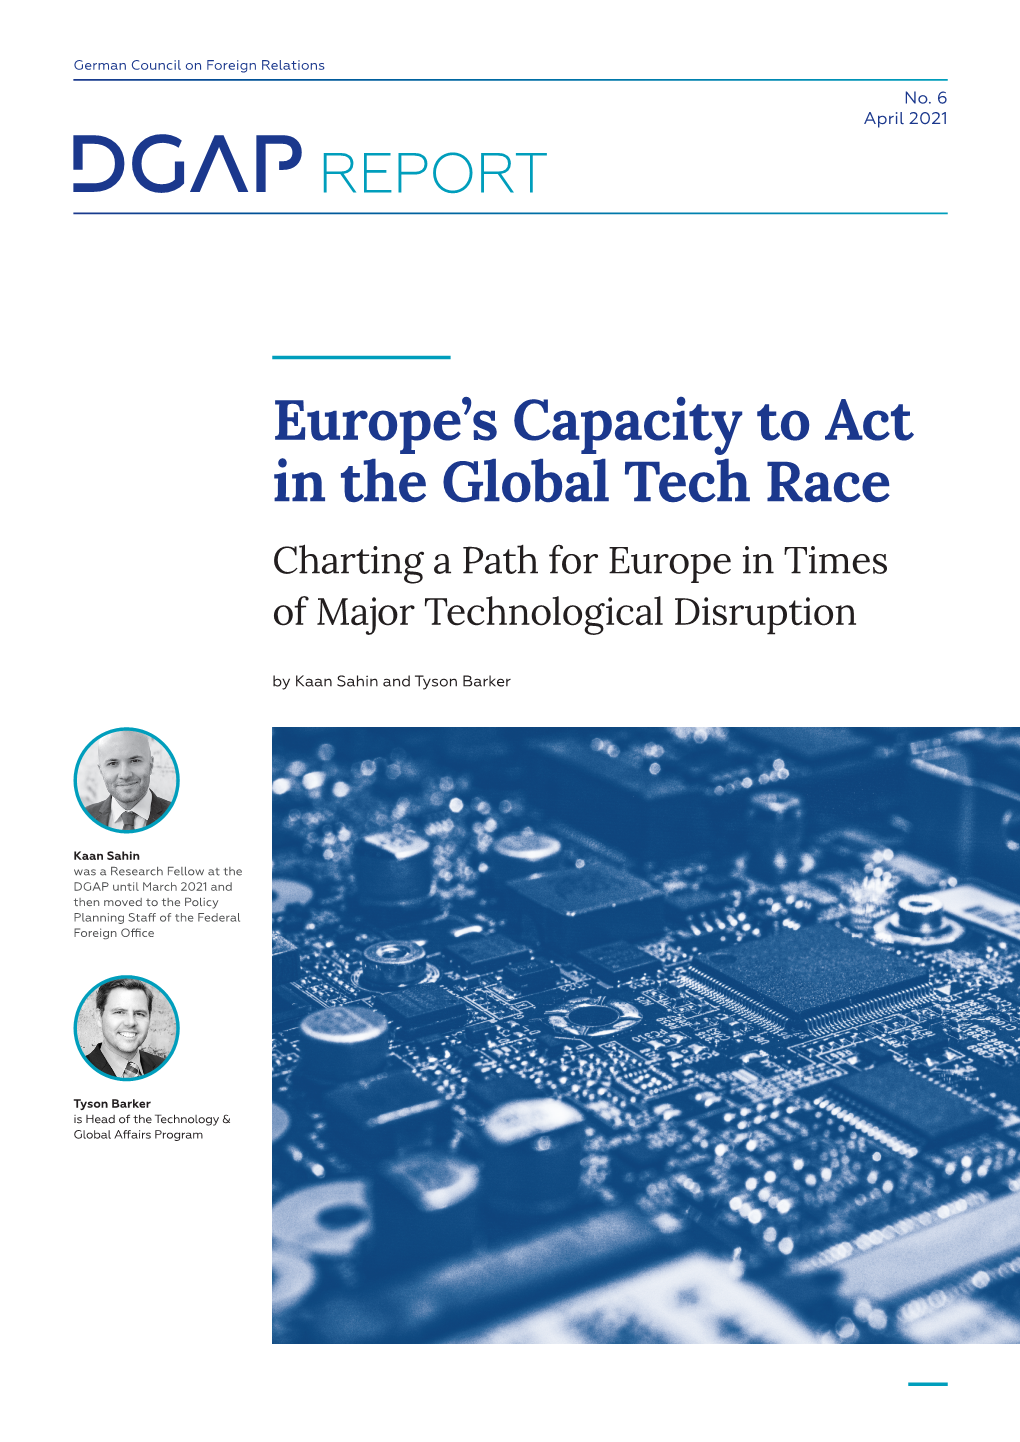 Europe's Capacity to Act in the Global Tech Race